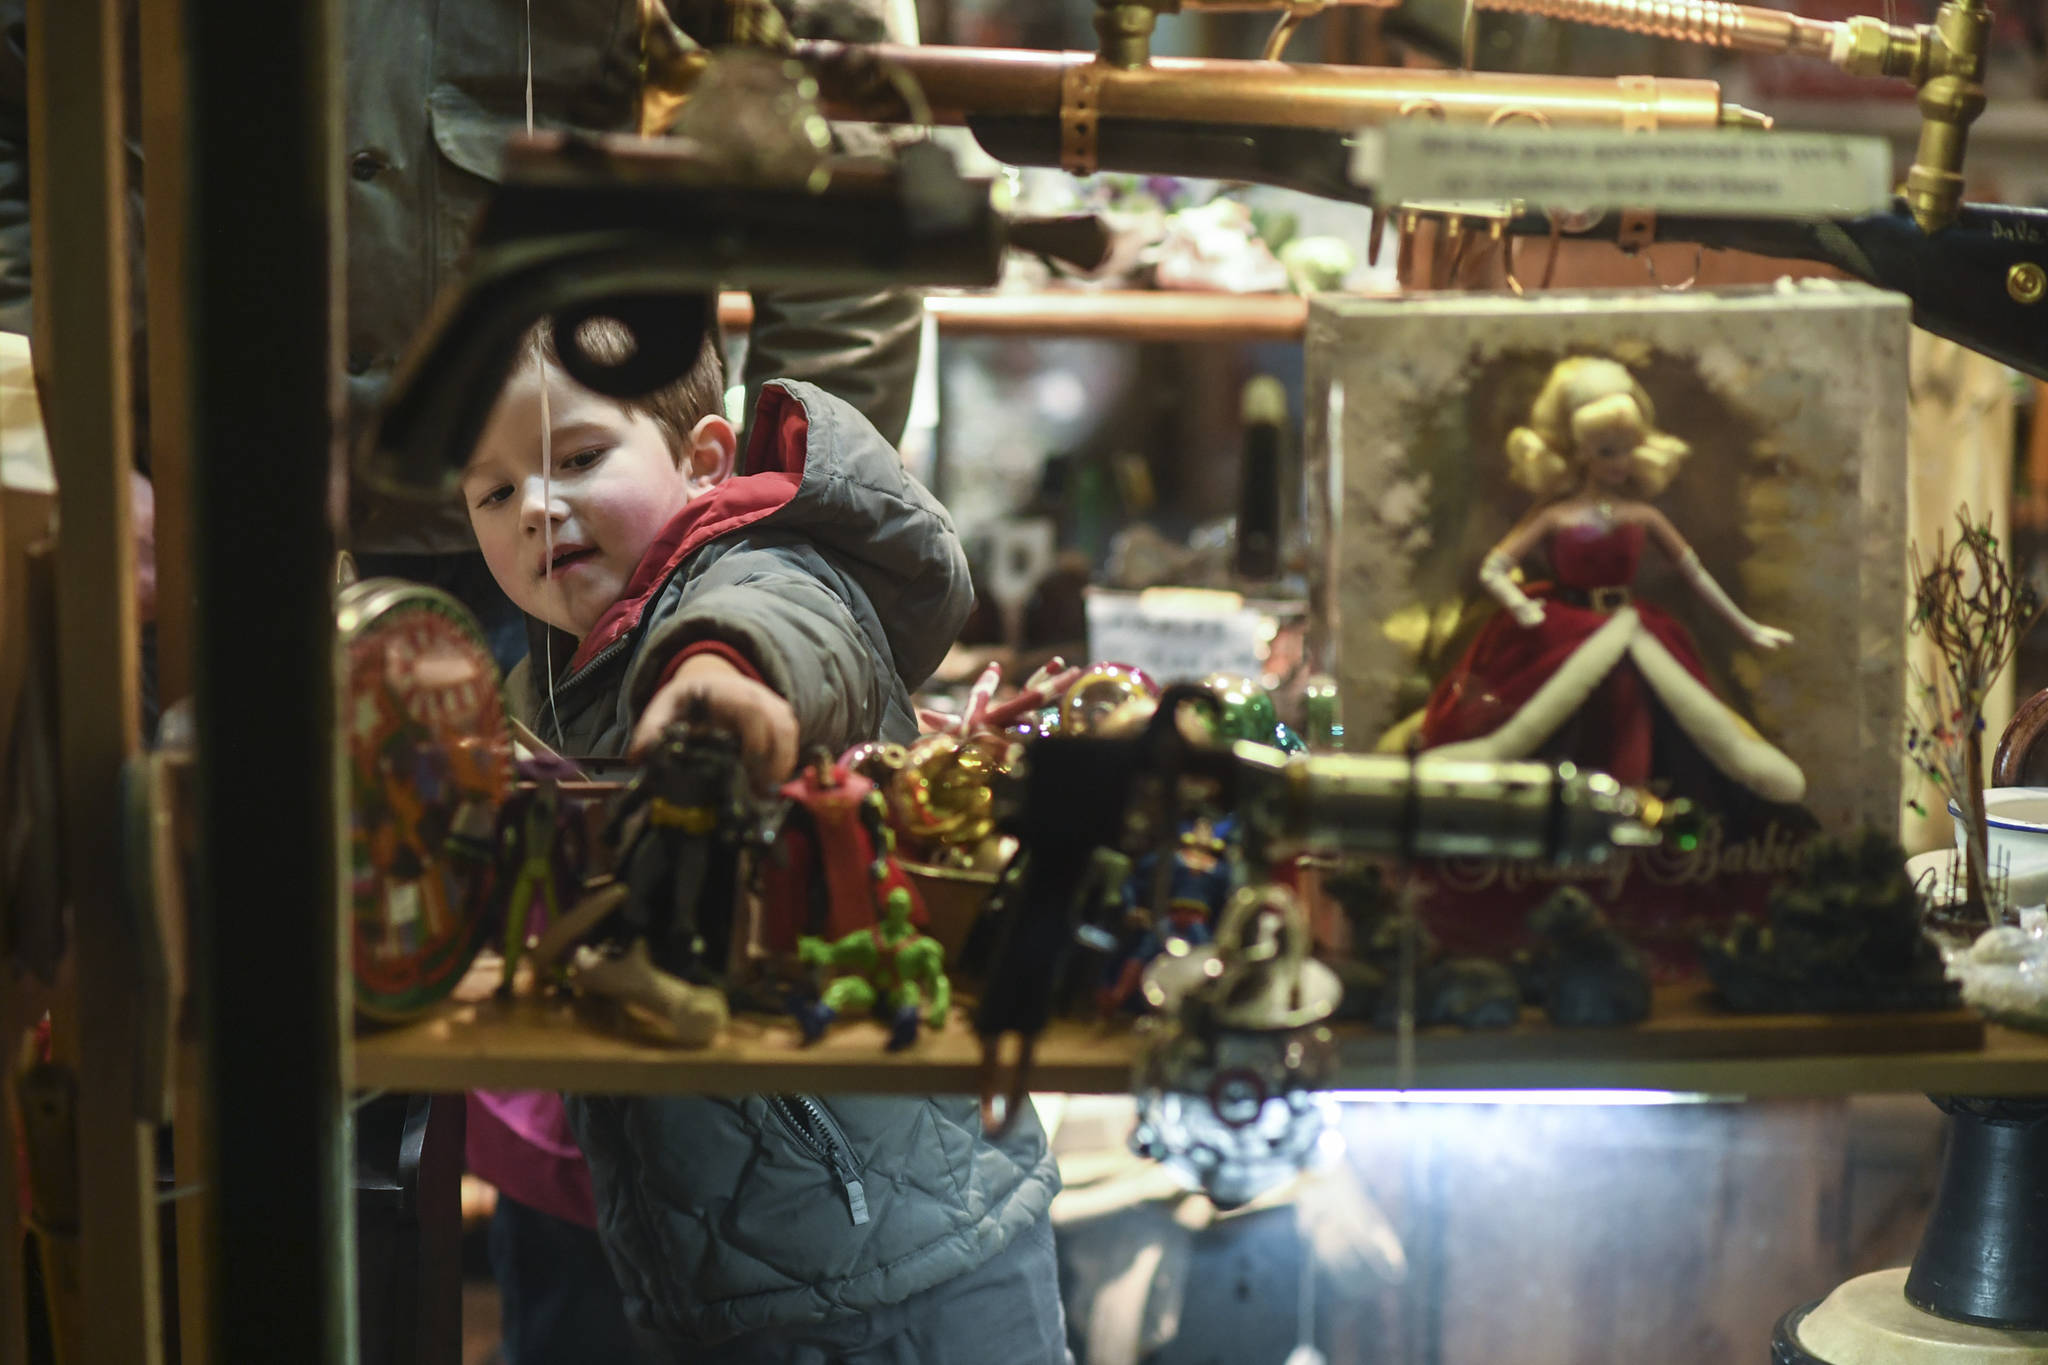 Breckett Davidson, 5, handles the toy collection at Nana’s Attic during Gallery Walk on Friday, Dec. 6, 2019. (Michael Penn | Juneau Empire)